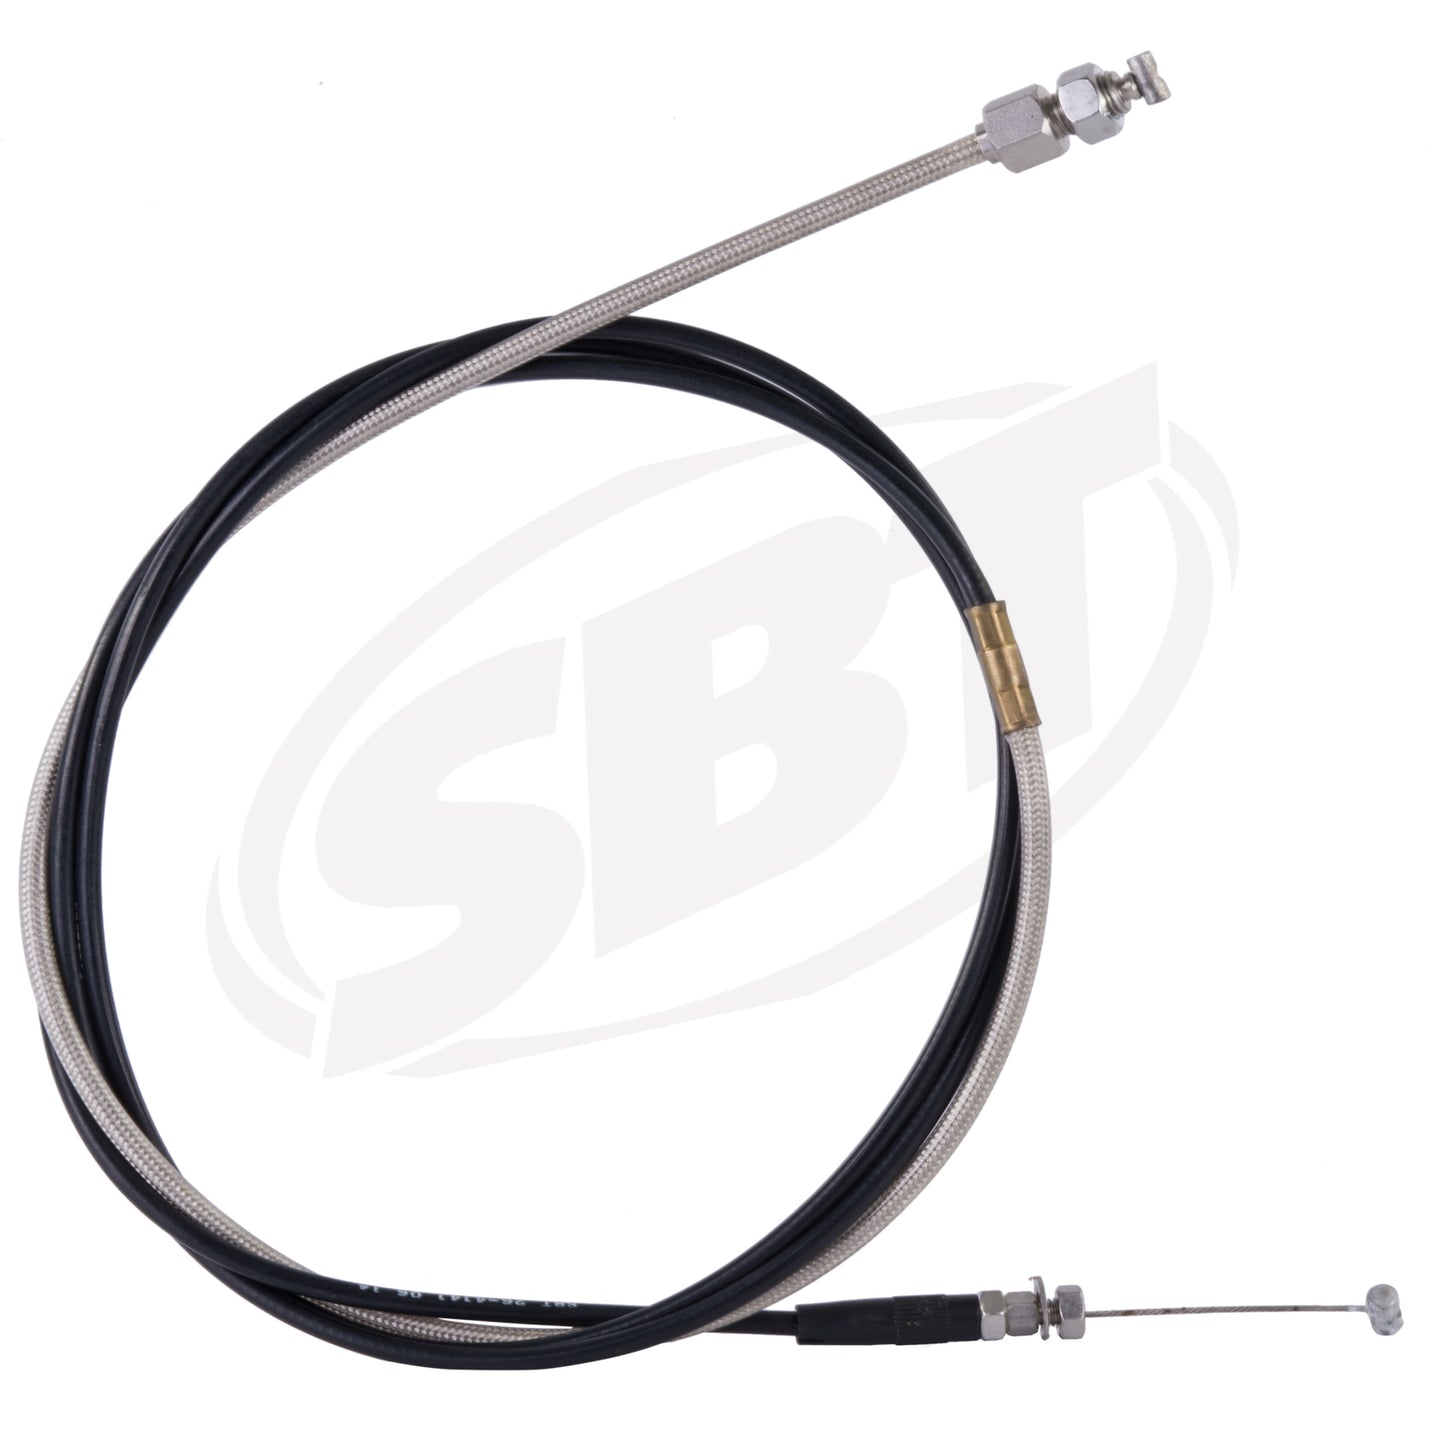 SBT Sea-Doo Throttle Cable RXT X 225 277001589 2008 2009